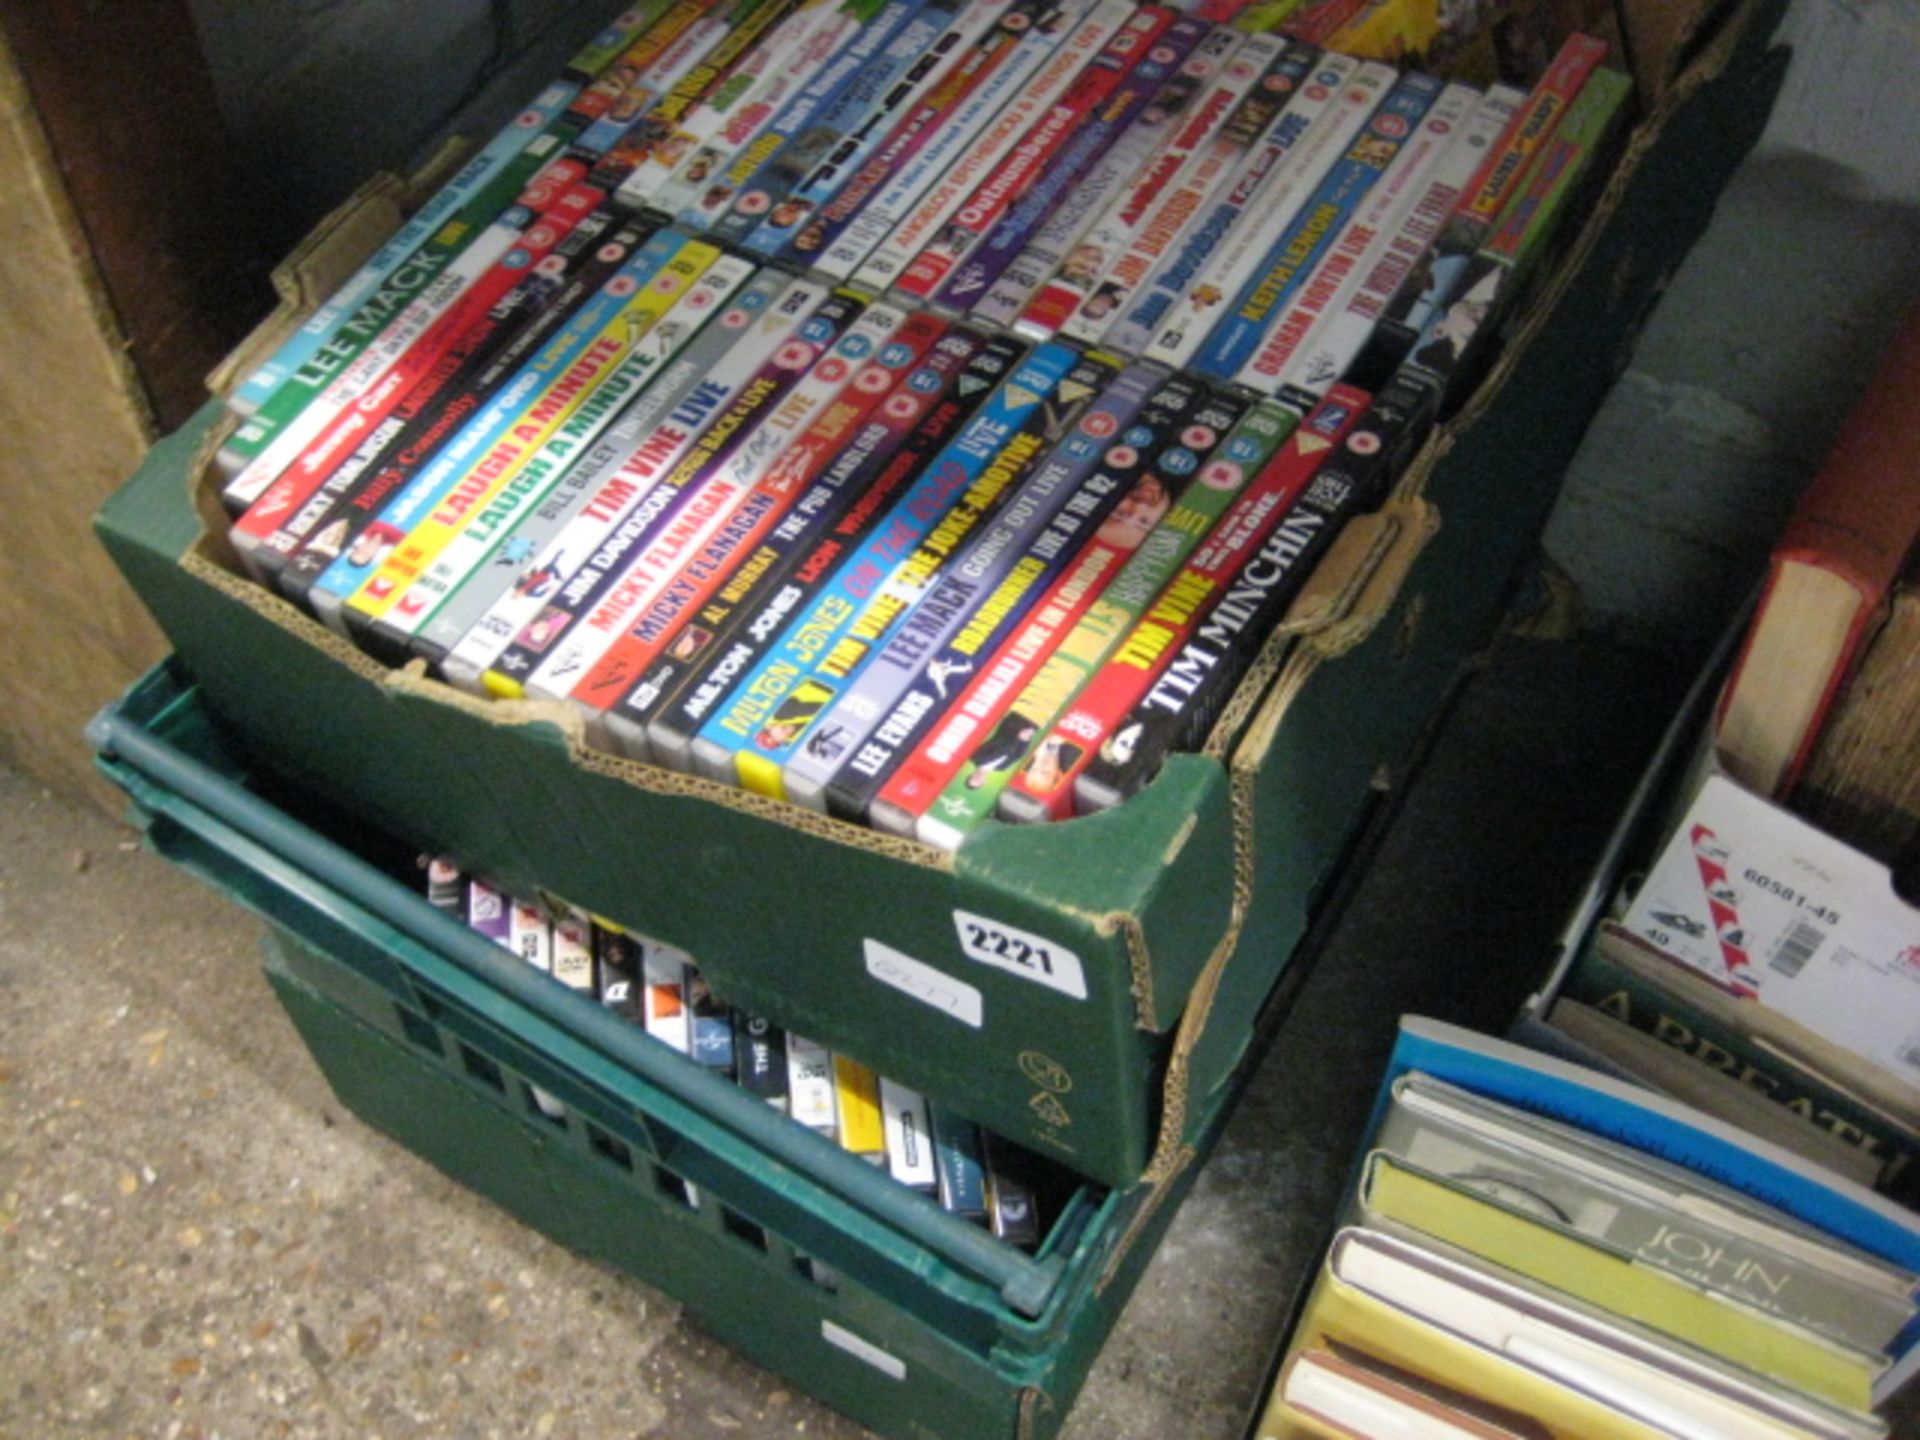 3 crates of mixed DVDs